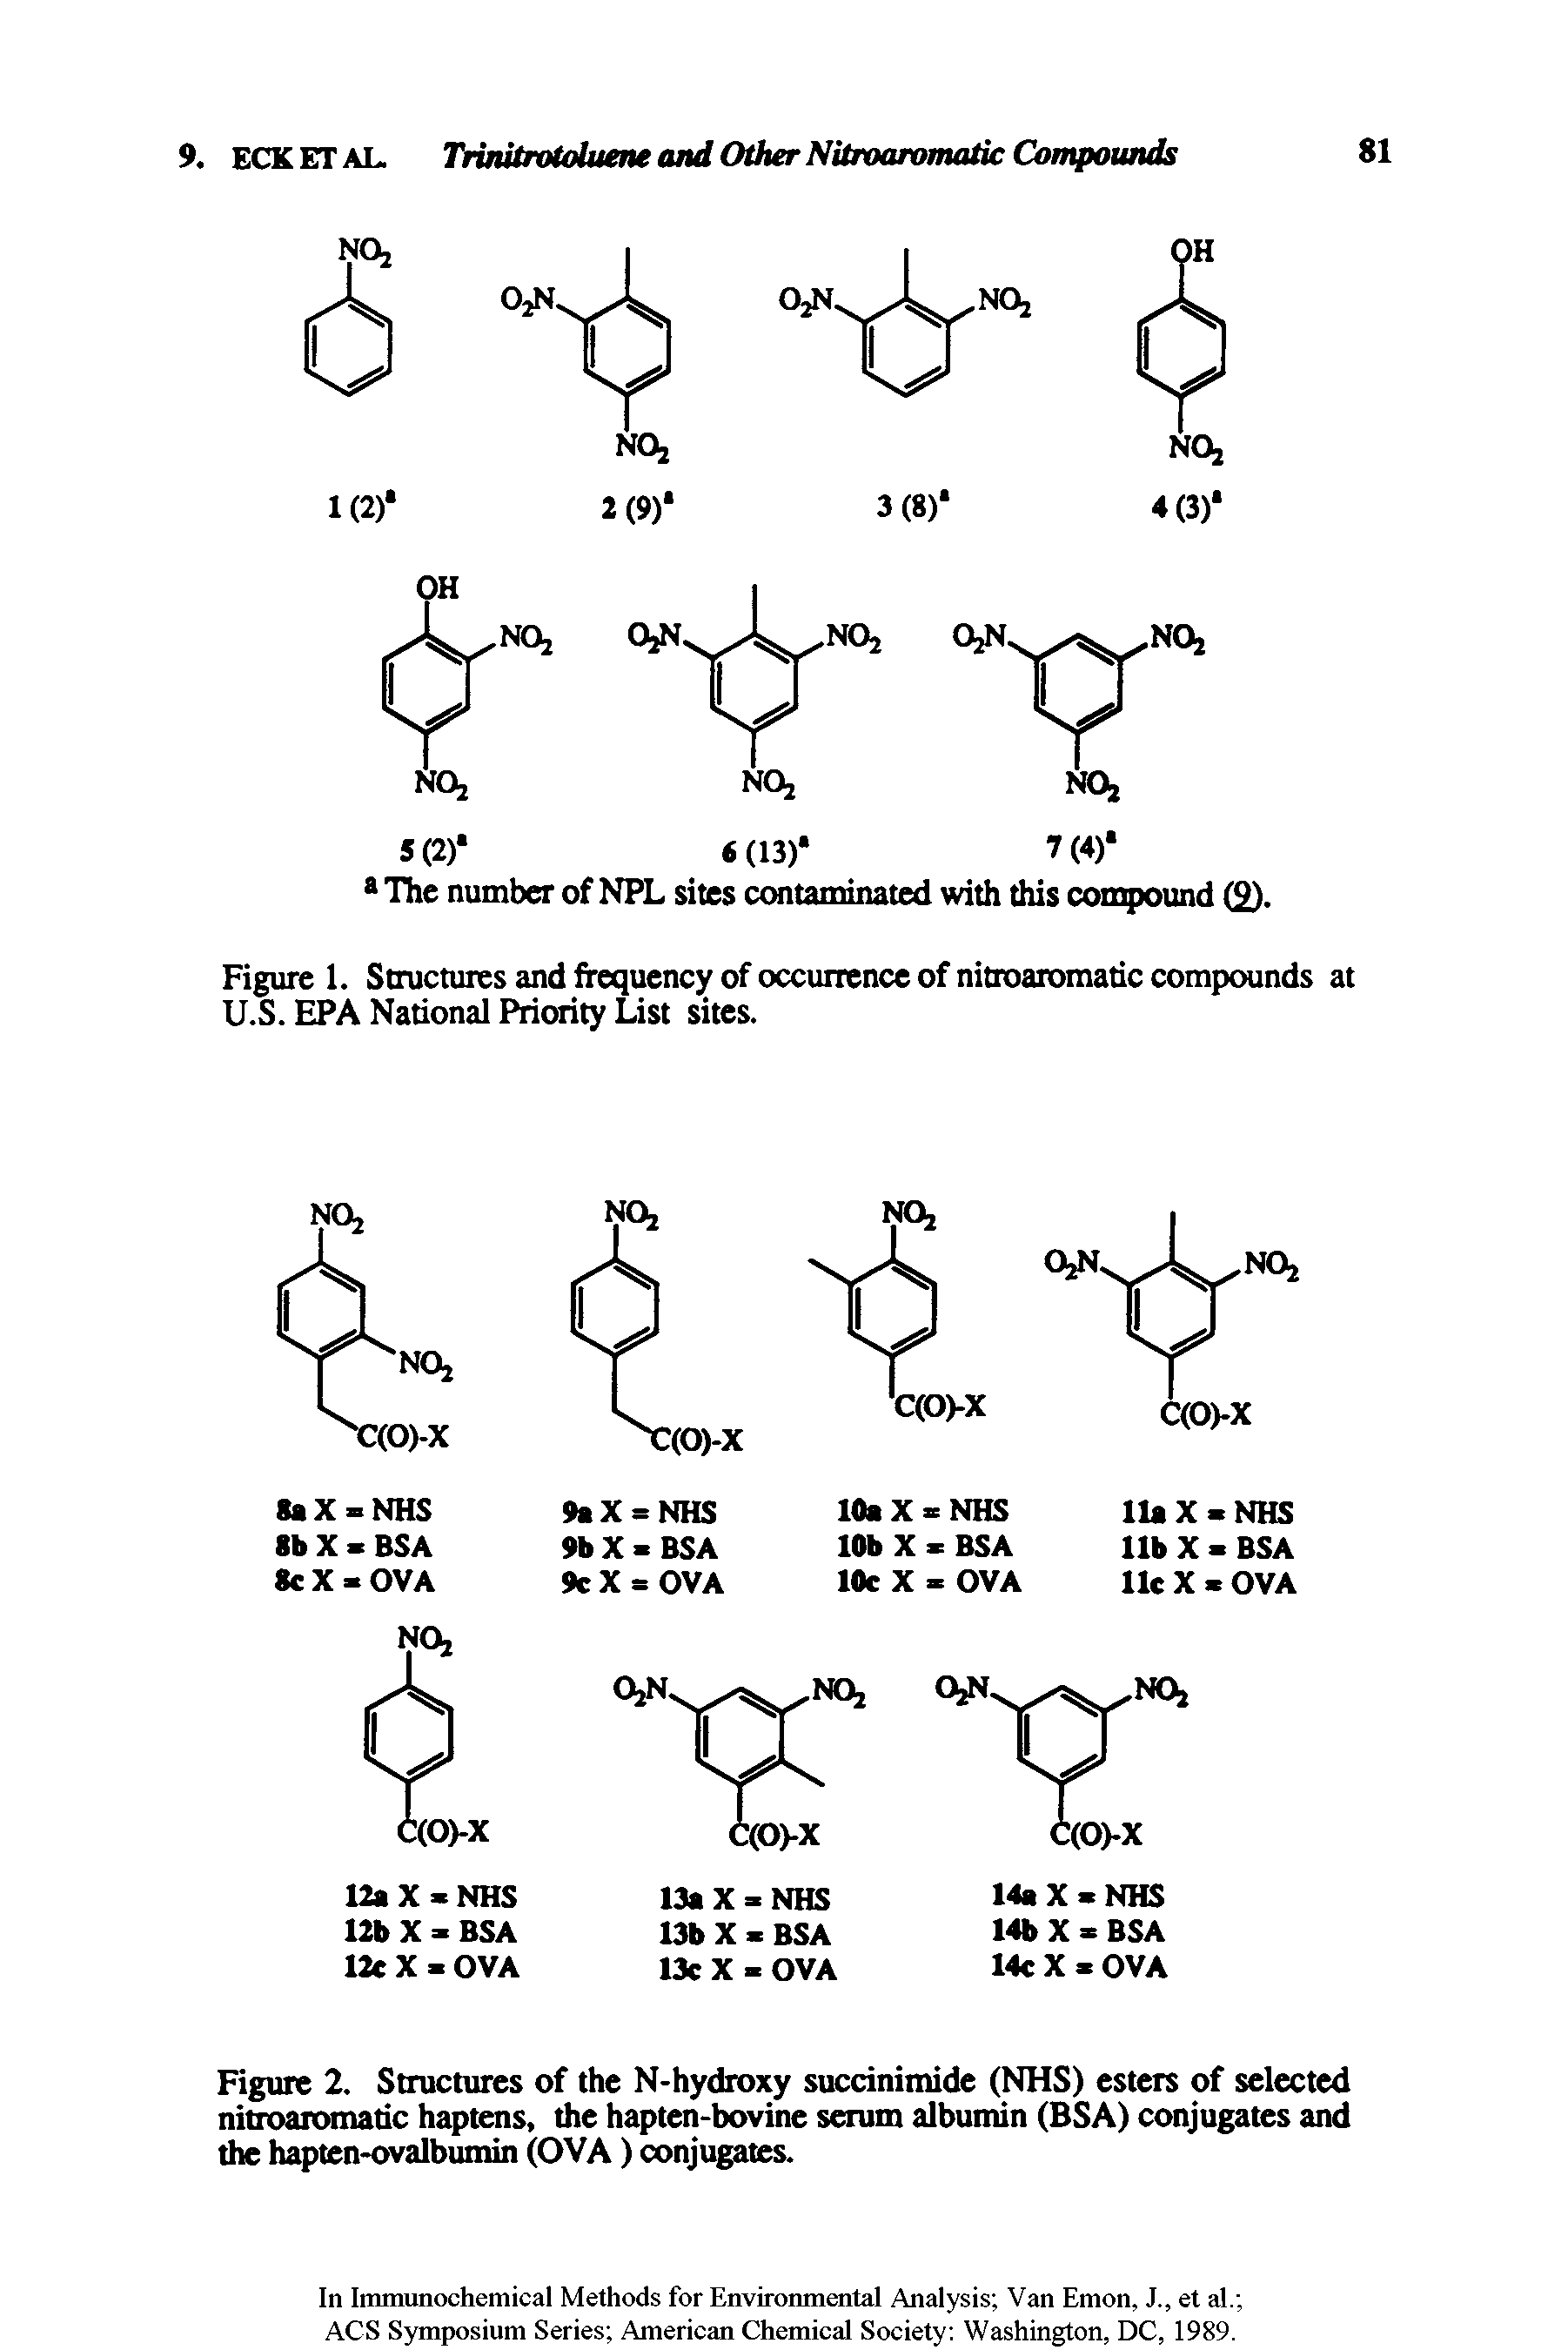 Figure 2. Structures of the N-hydroxy succinimide (NHS) esters of selected nitroaromatic haptens, the hapten-bovine serum albumin (BSA) conjugates and the hapten-ovalbumin (OVA) conjugates.